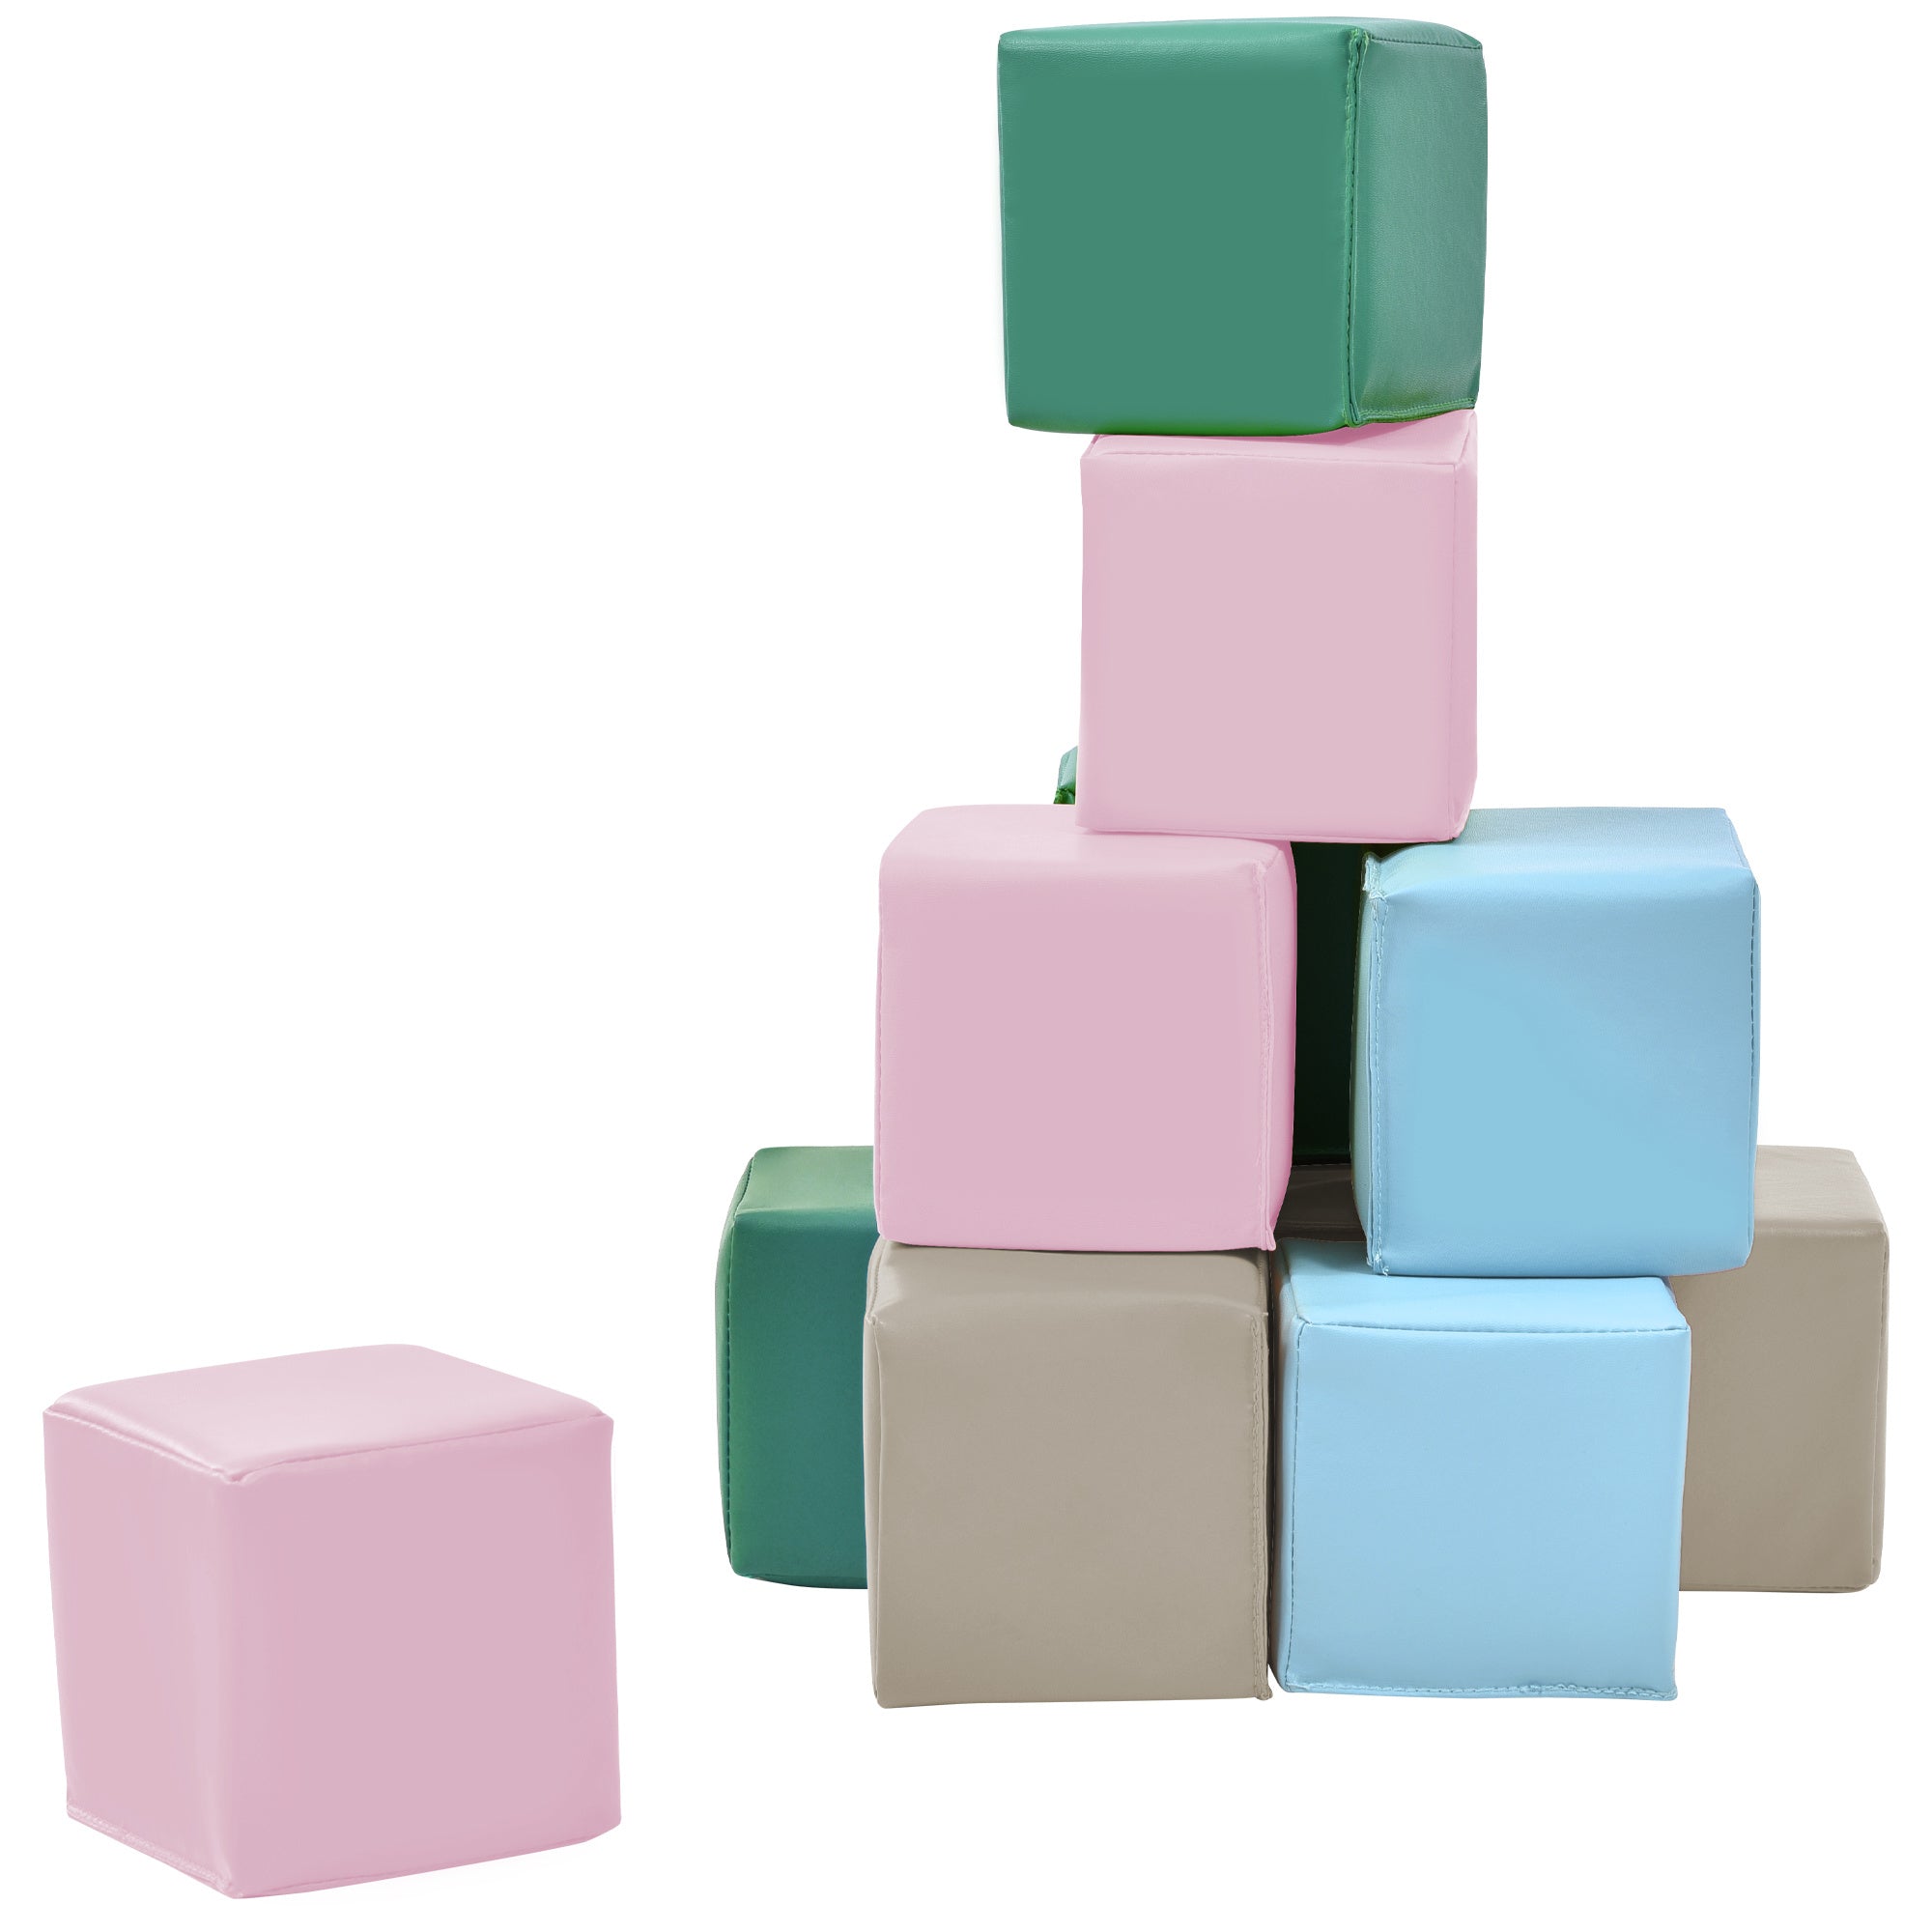 A vibrant collection of SoftZone Toddler Foam Block Playset in a living room.